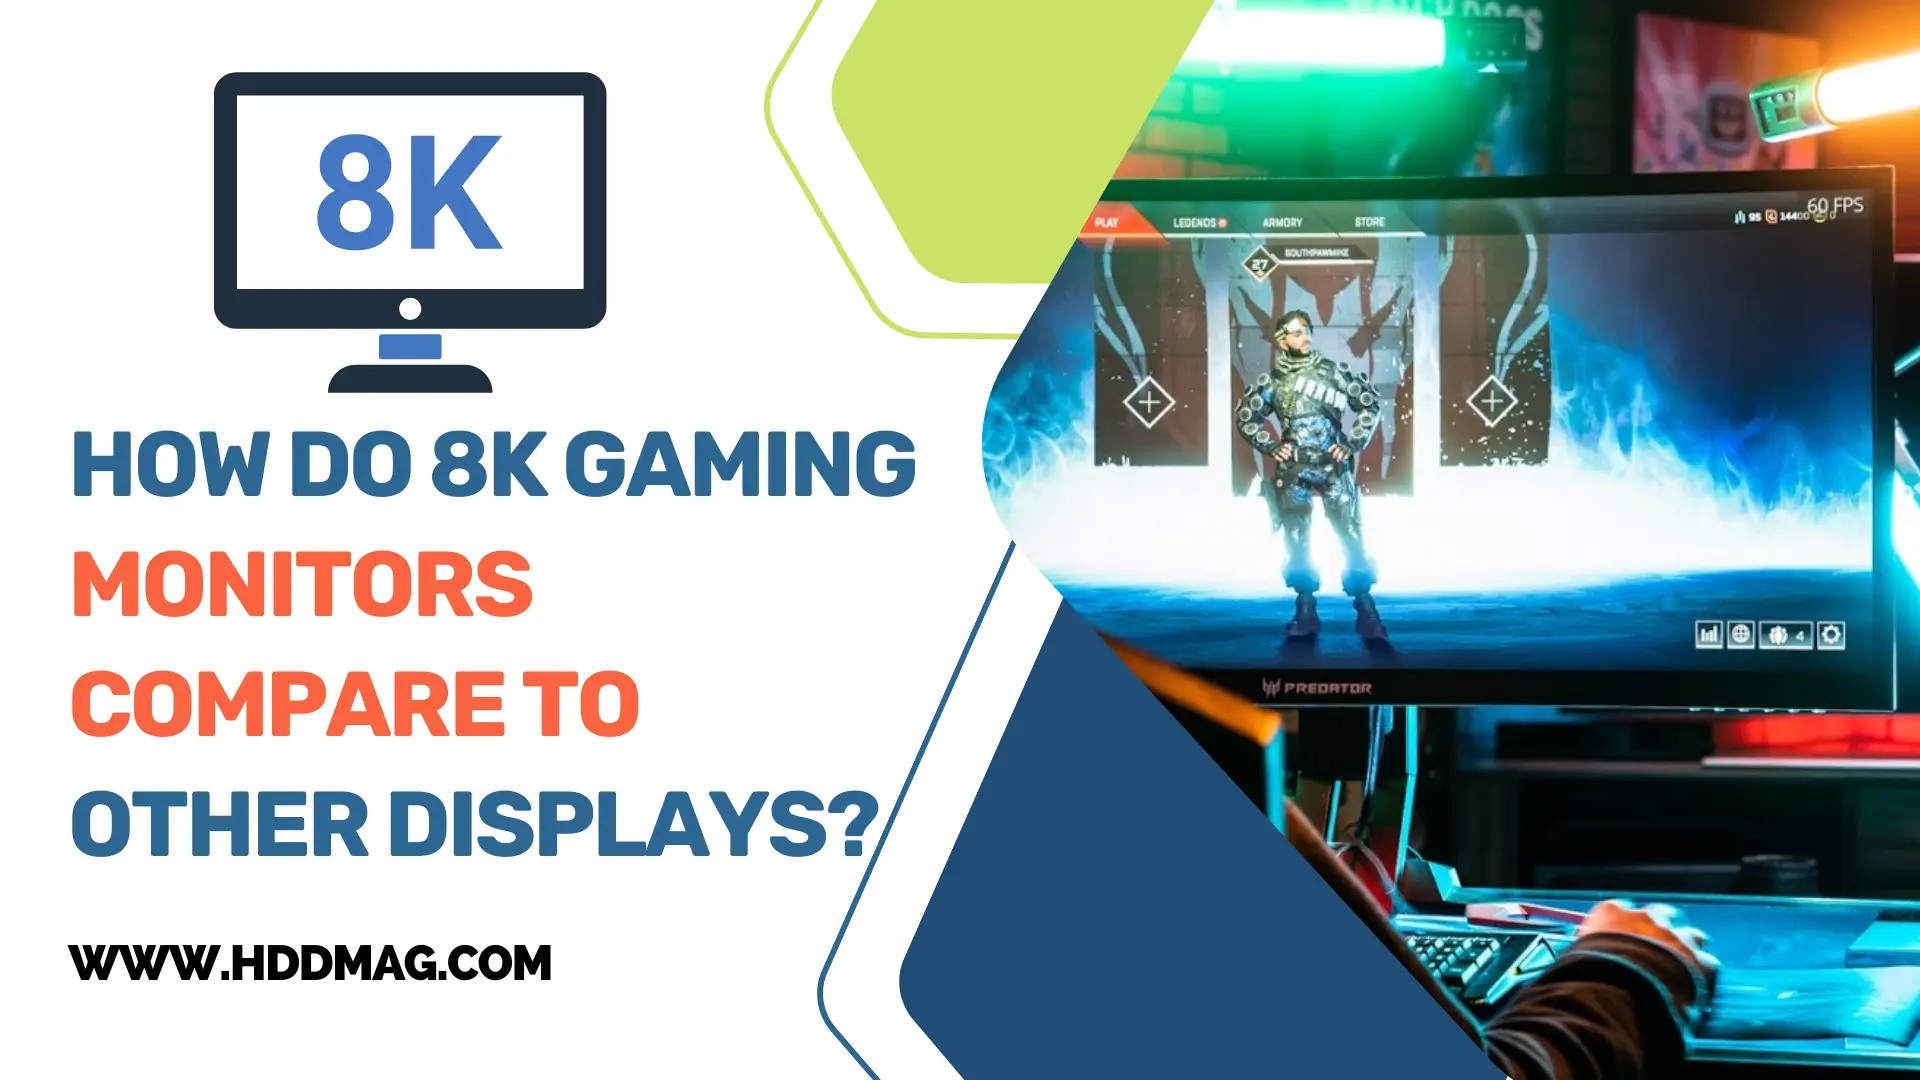 How Do 8K Gaming Monitors Compare to Other Displays